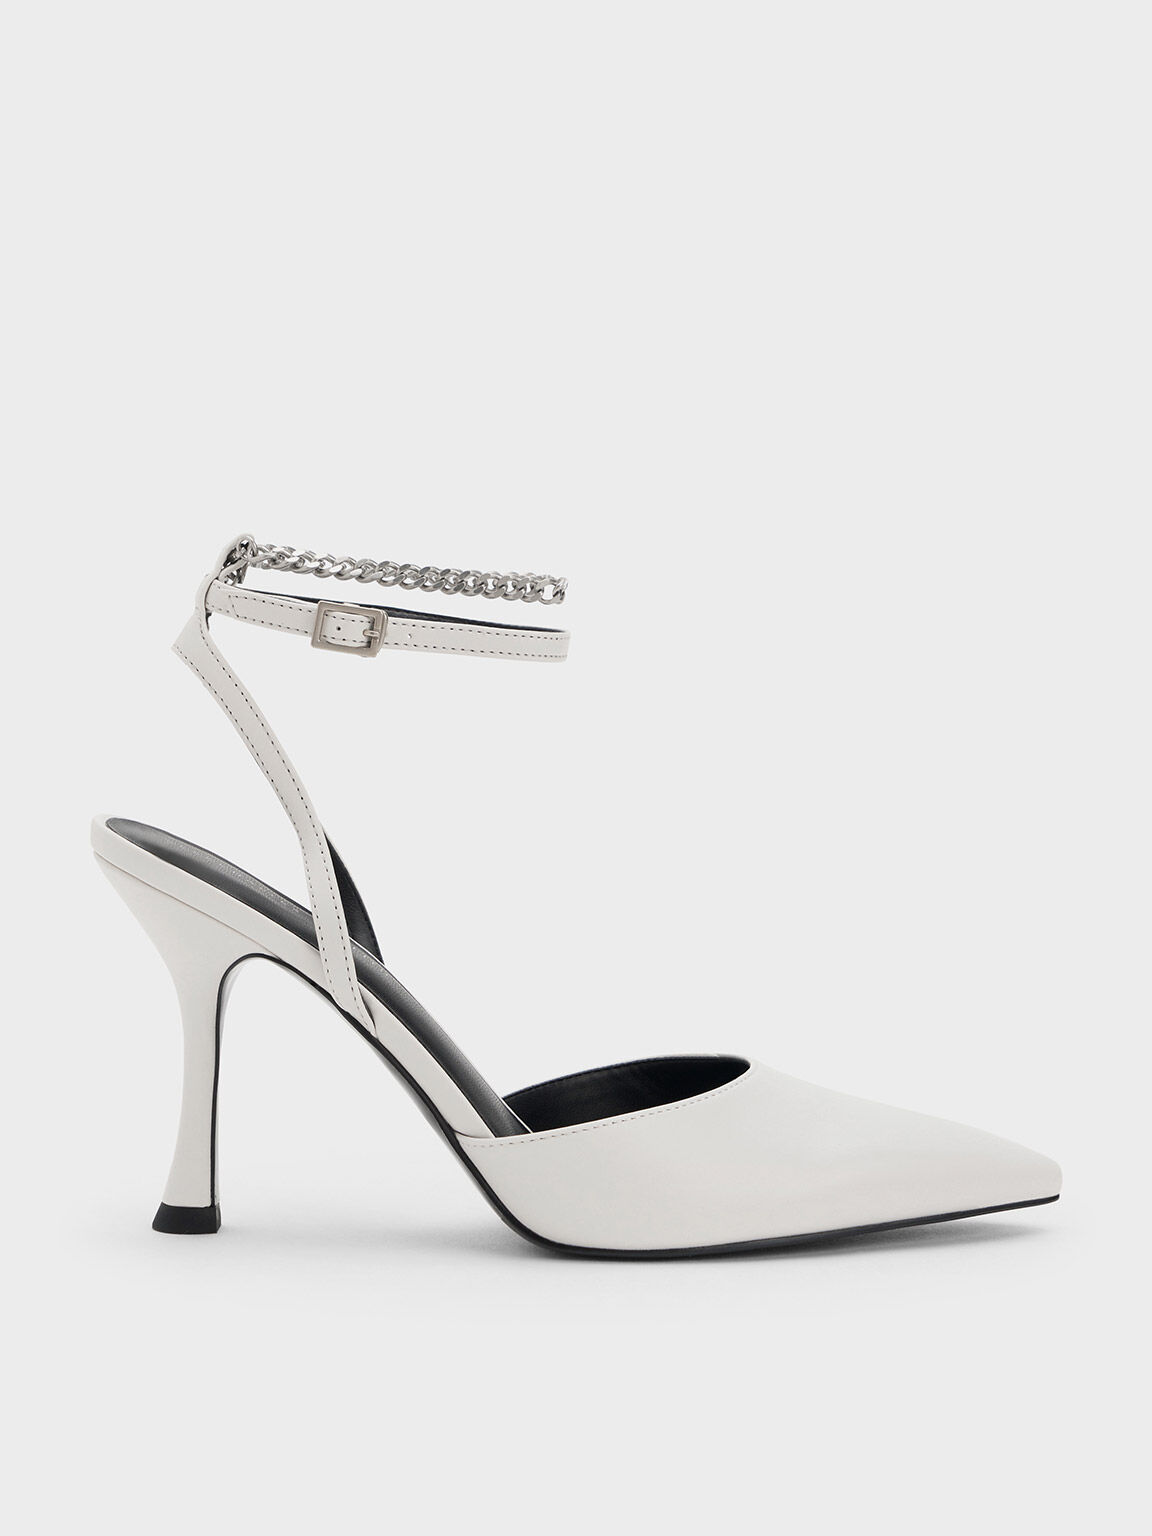 Chain-Link Ankle-Strap Pumps, White, hi-res